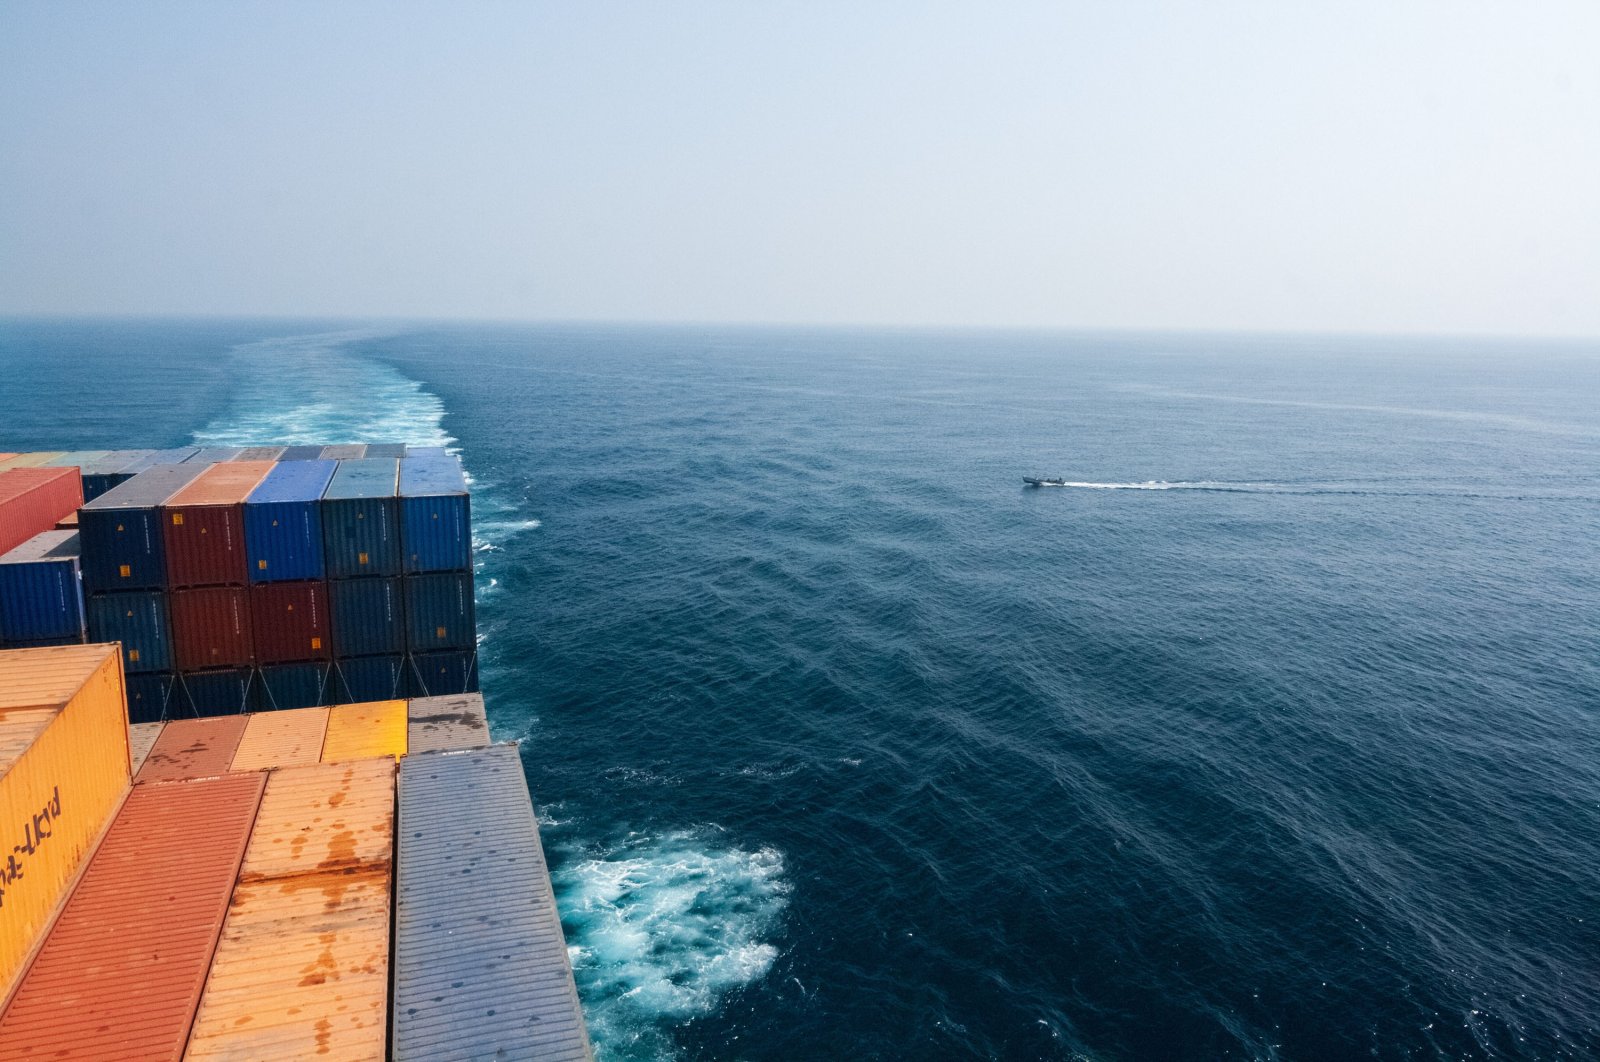 Illustration of a probable act of piracy on a cargo ship off the Horn of Africa off the coast of Somalia in the Gulf of Aden, Yemen, on Jan. 11, 2017. (File photo by Camille Delbos / Art In All of Us / Corbis via Getty Images)